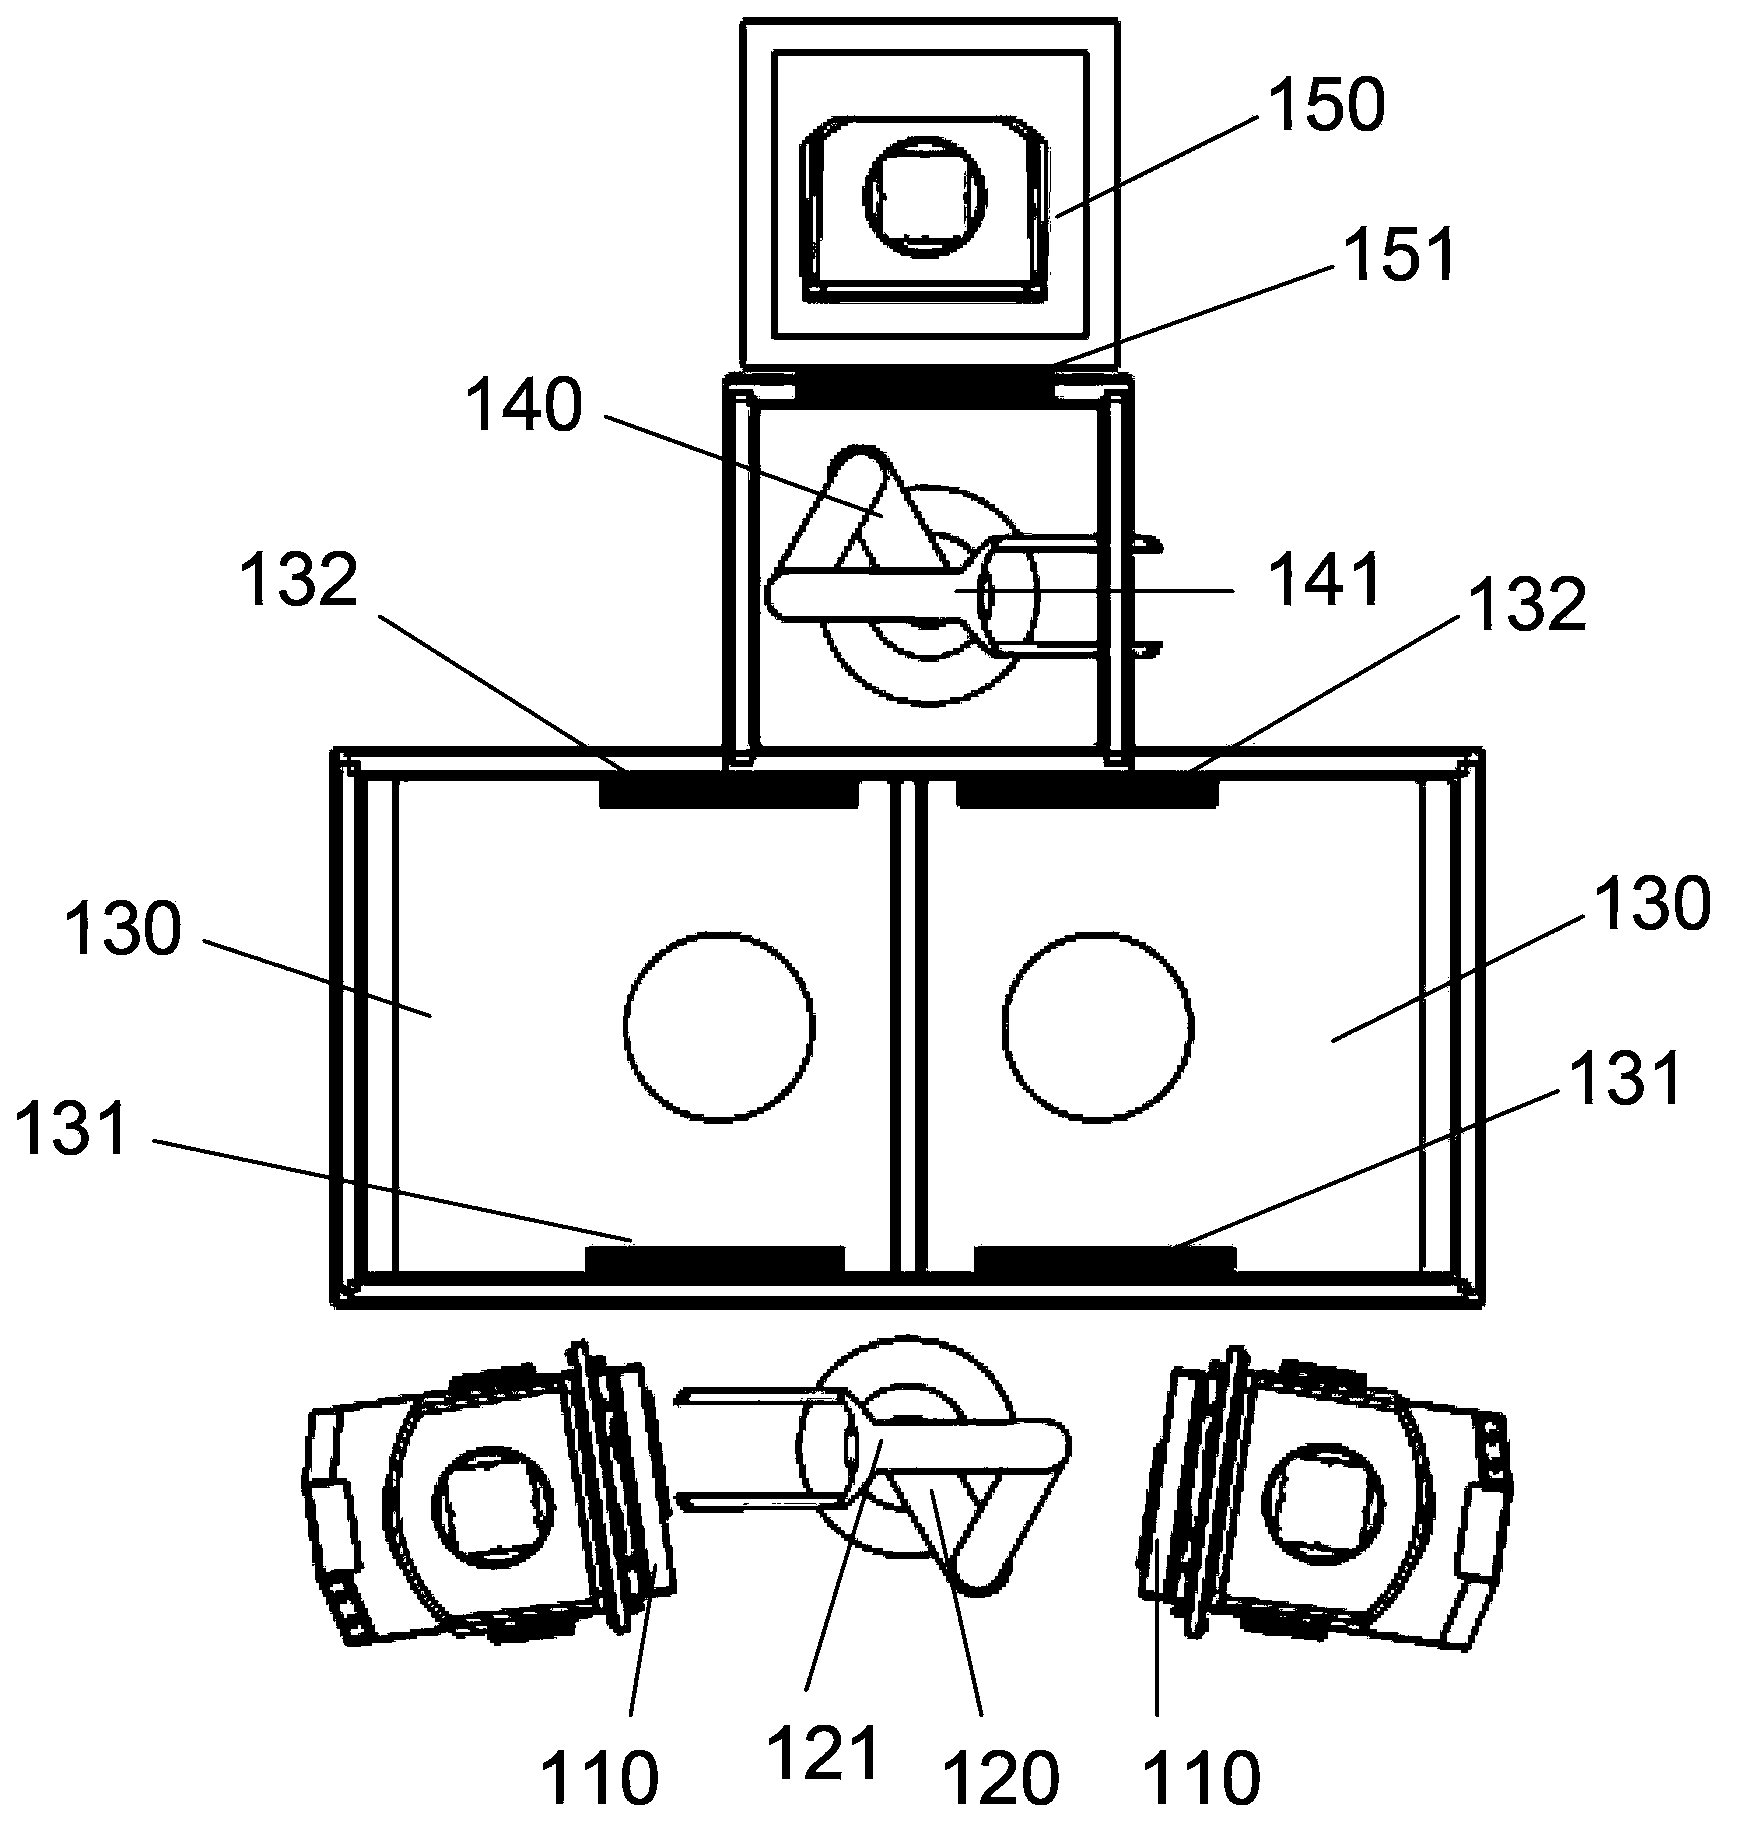 Substrate cleaning device and method